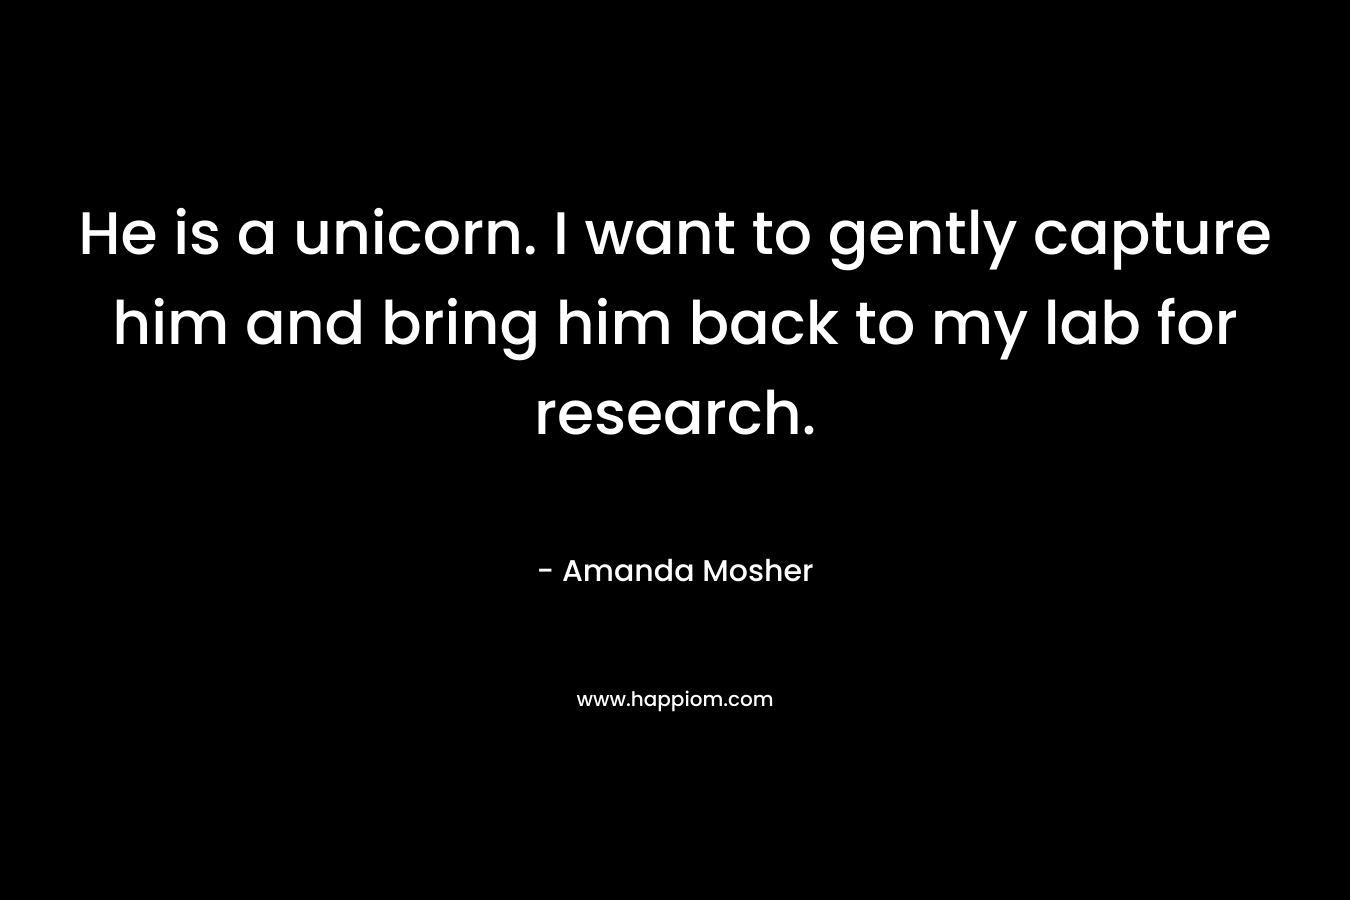 He is a unicorn. I want to gently capture him and bring him back to my lab for research. – Amanda Mosher